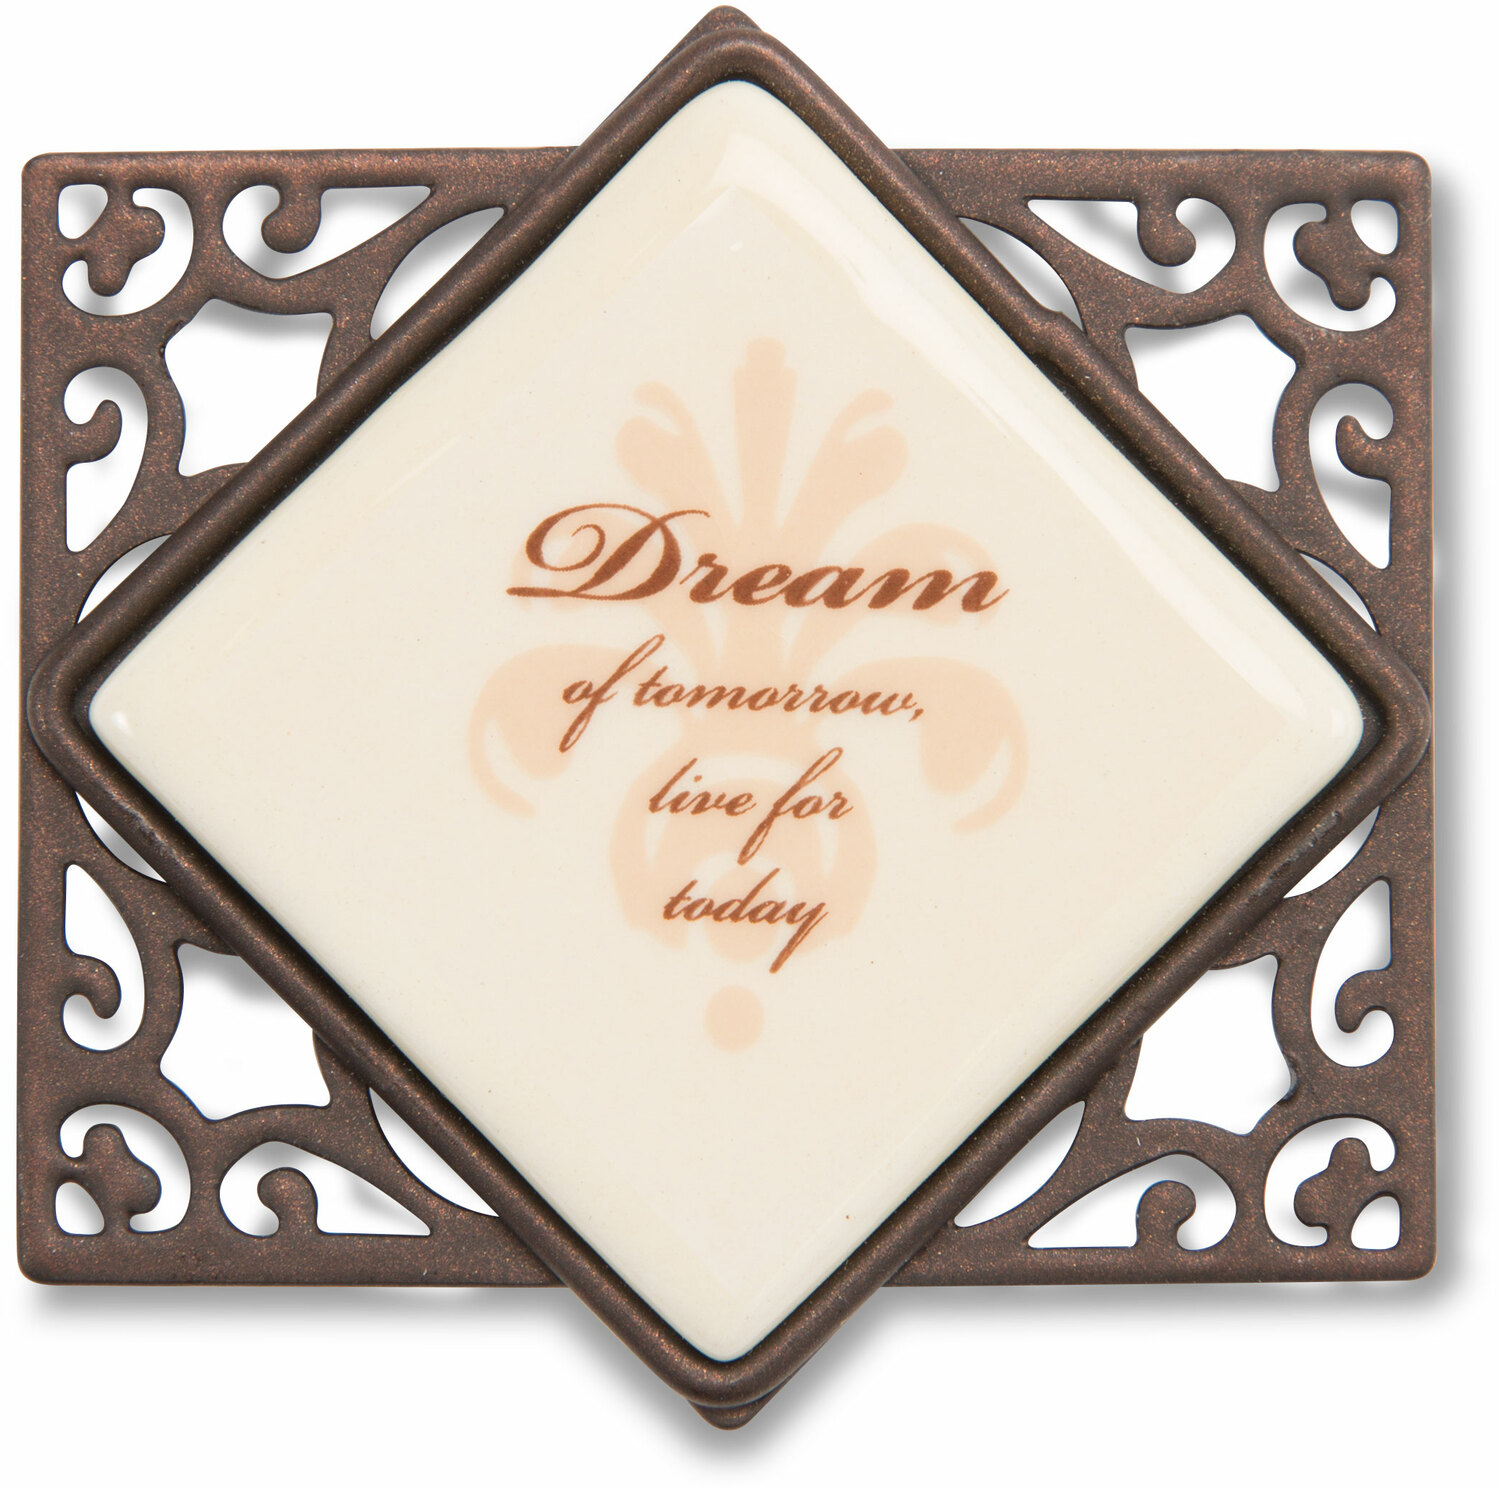 Dreams by Simply Stated - Dreams - 2.25" x 2" Magnet with Scroll (Set of 6)